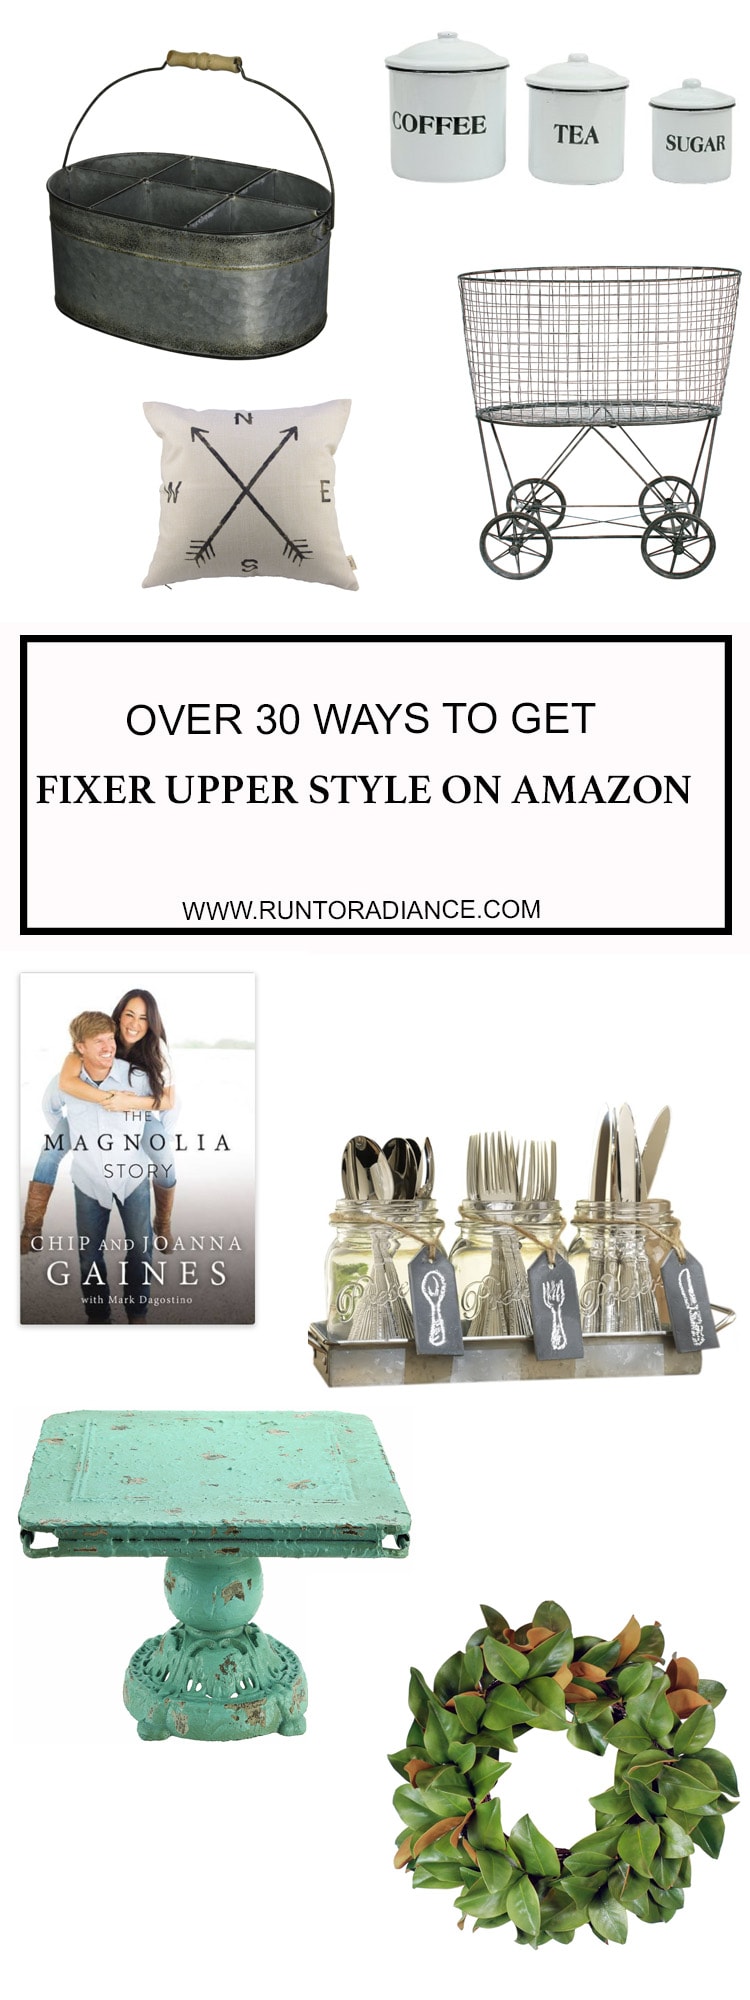 I love the show Fixer Upper, and it's so easy to get the Fixer Upper look on my favorite shopping site, Amazon.com. Fixer Upper on Amazon - Hooray!